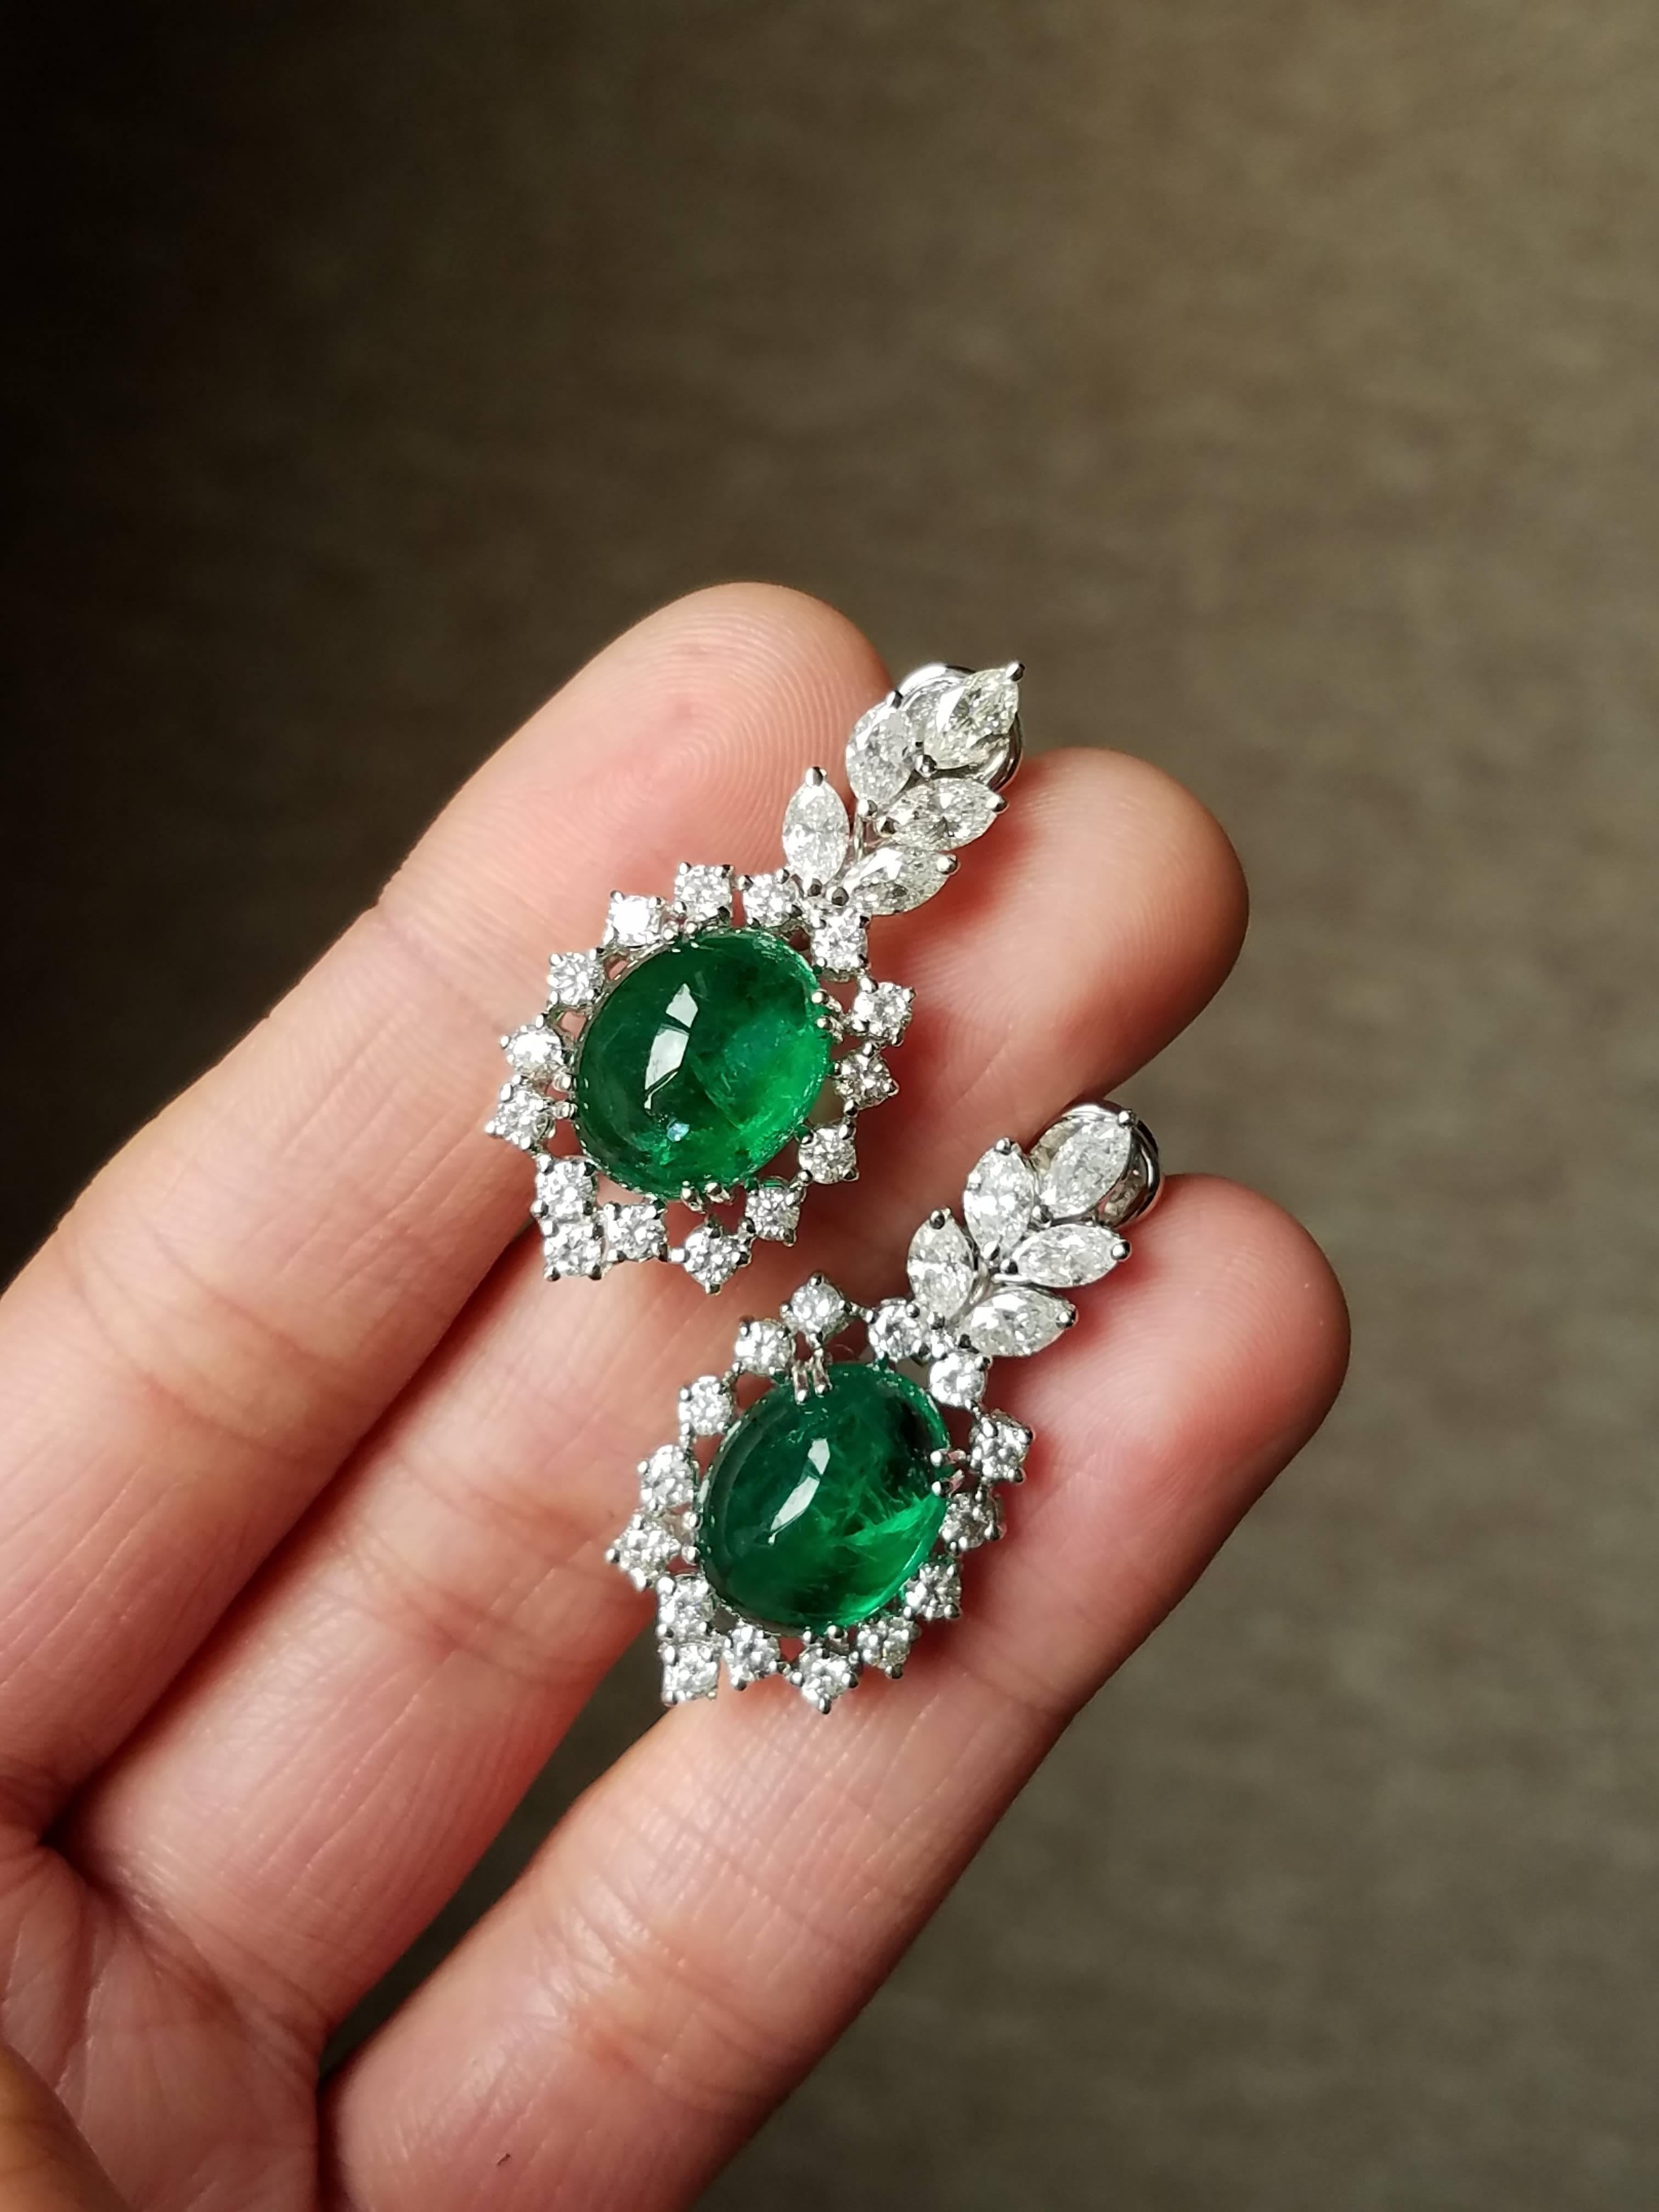 A beautiful pair of Zambian Emerald Cabochon earrings, of great quality and colour set in 18K White Gold and round/marquise shaped White Diamonds. 

Stone Detail:
Stone: Zambian Emerald 
Total Weight: 12.66 carat

Diamond Detail:
Total Weight: 3.31